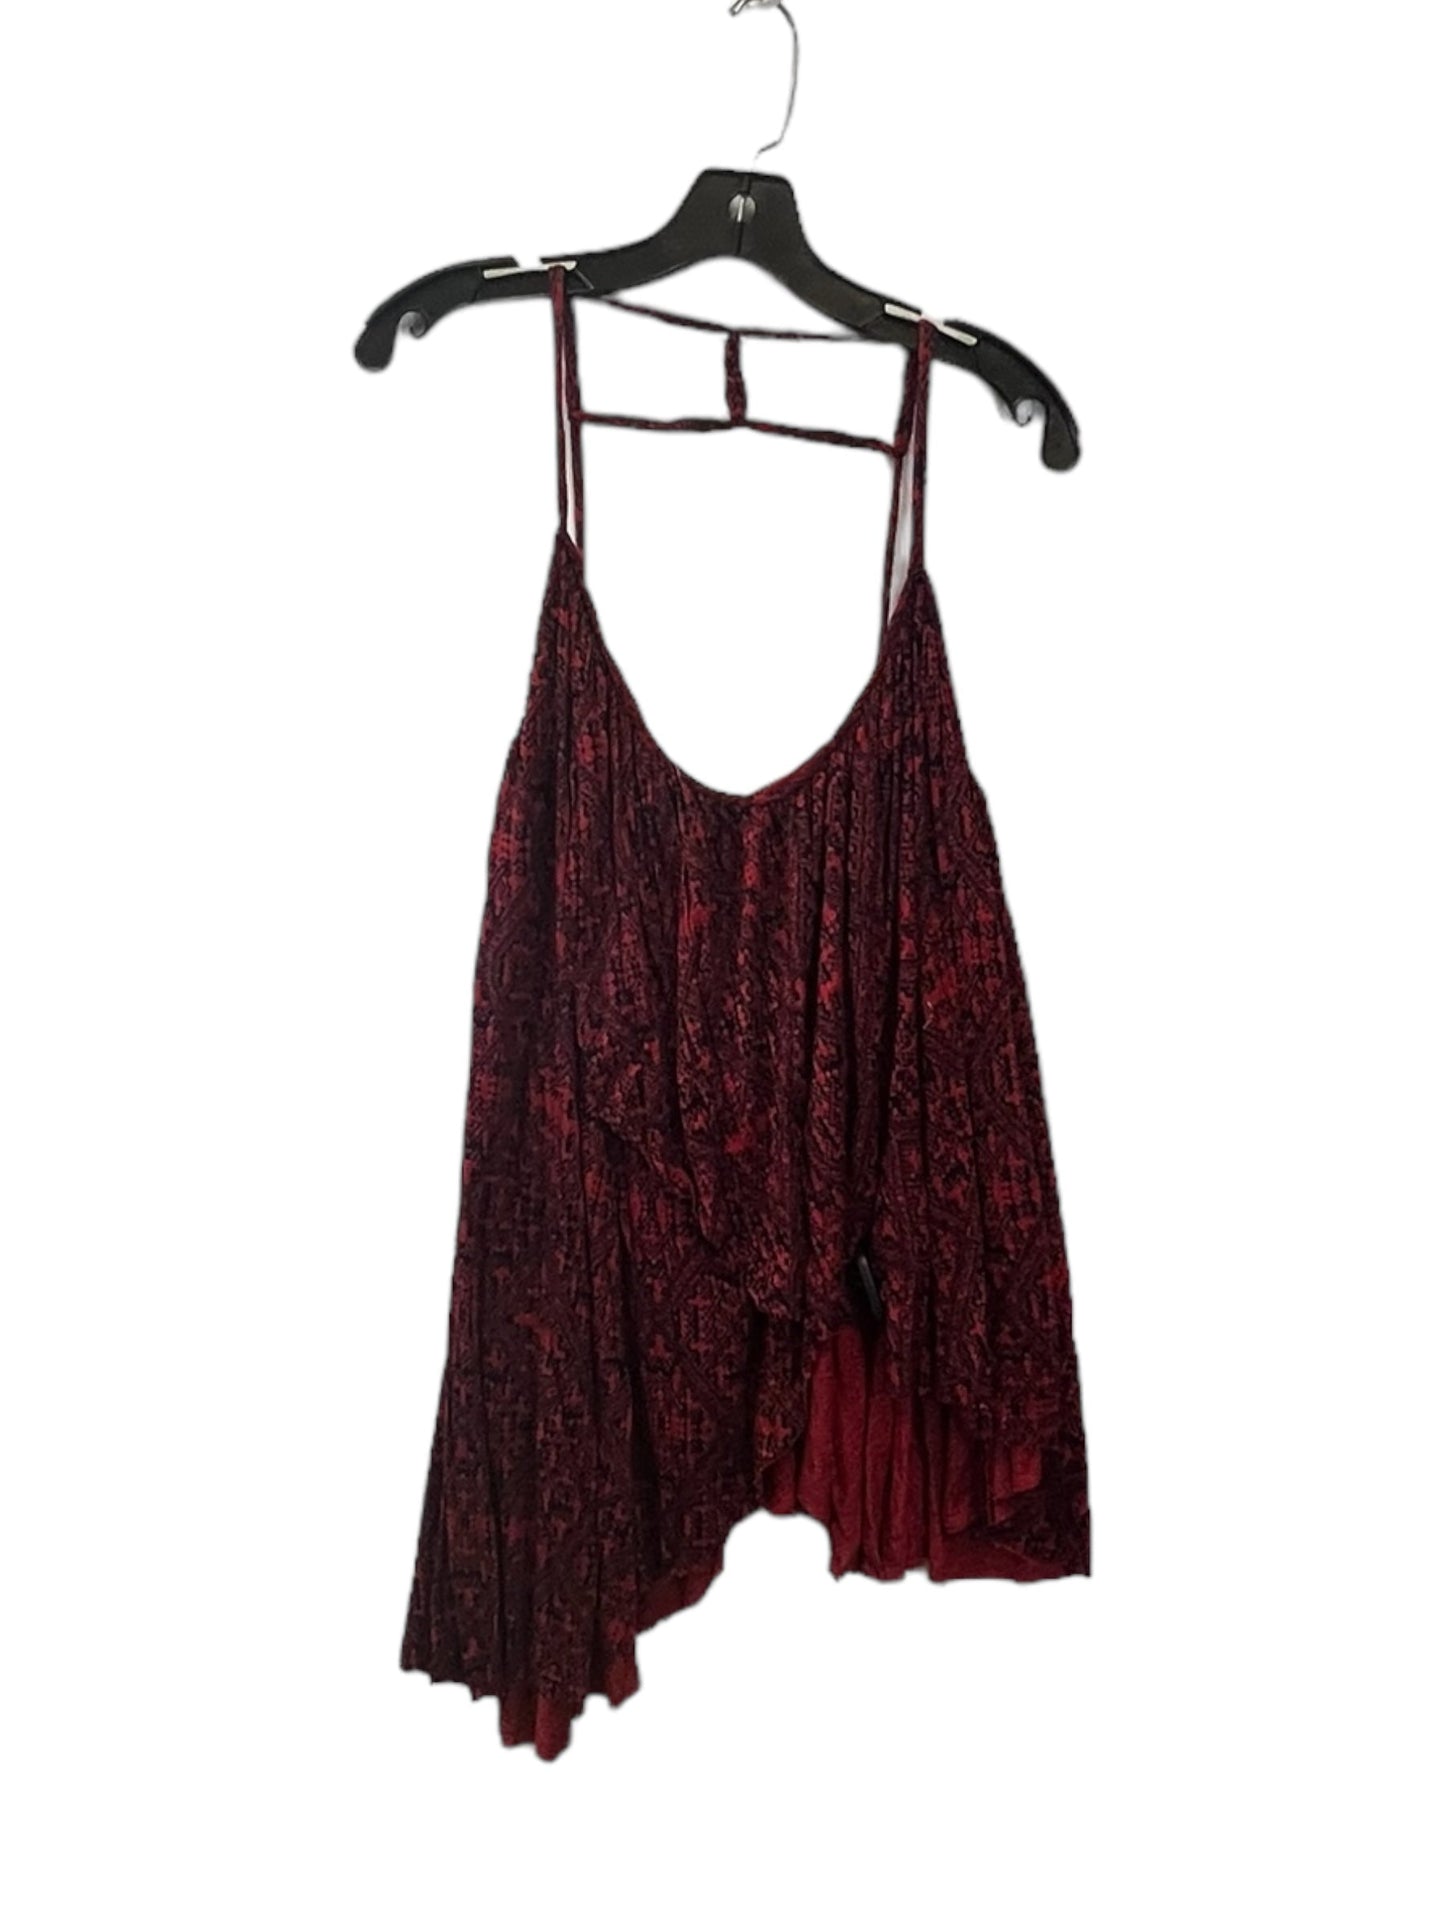 Black & Red Top Sleeveless Free People, Size M